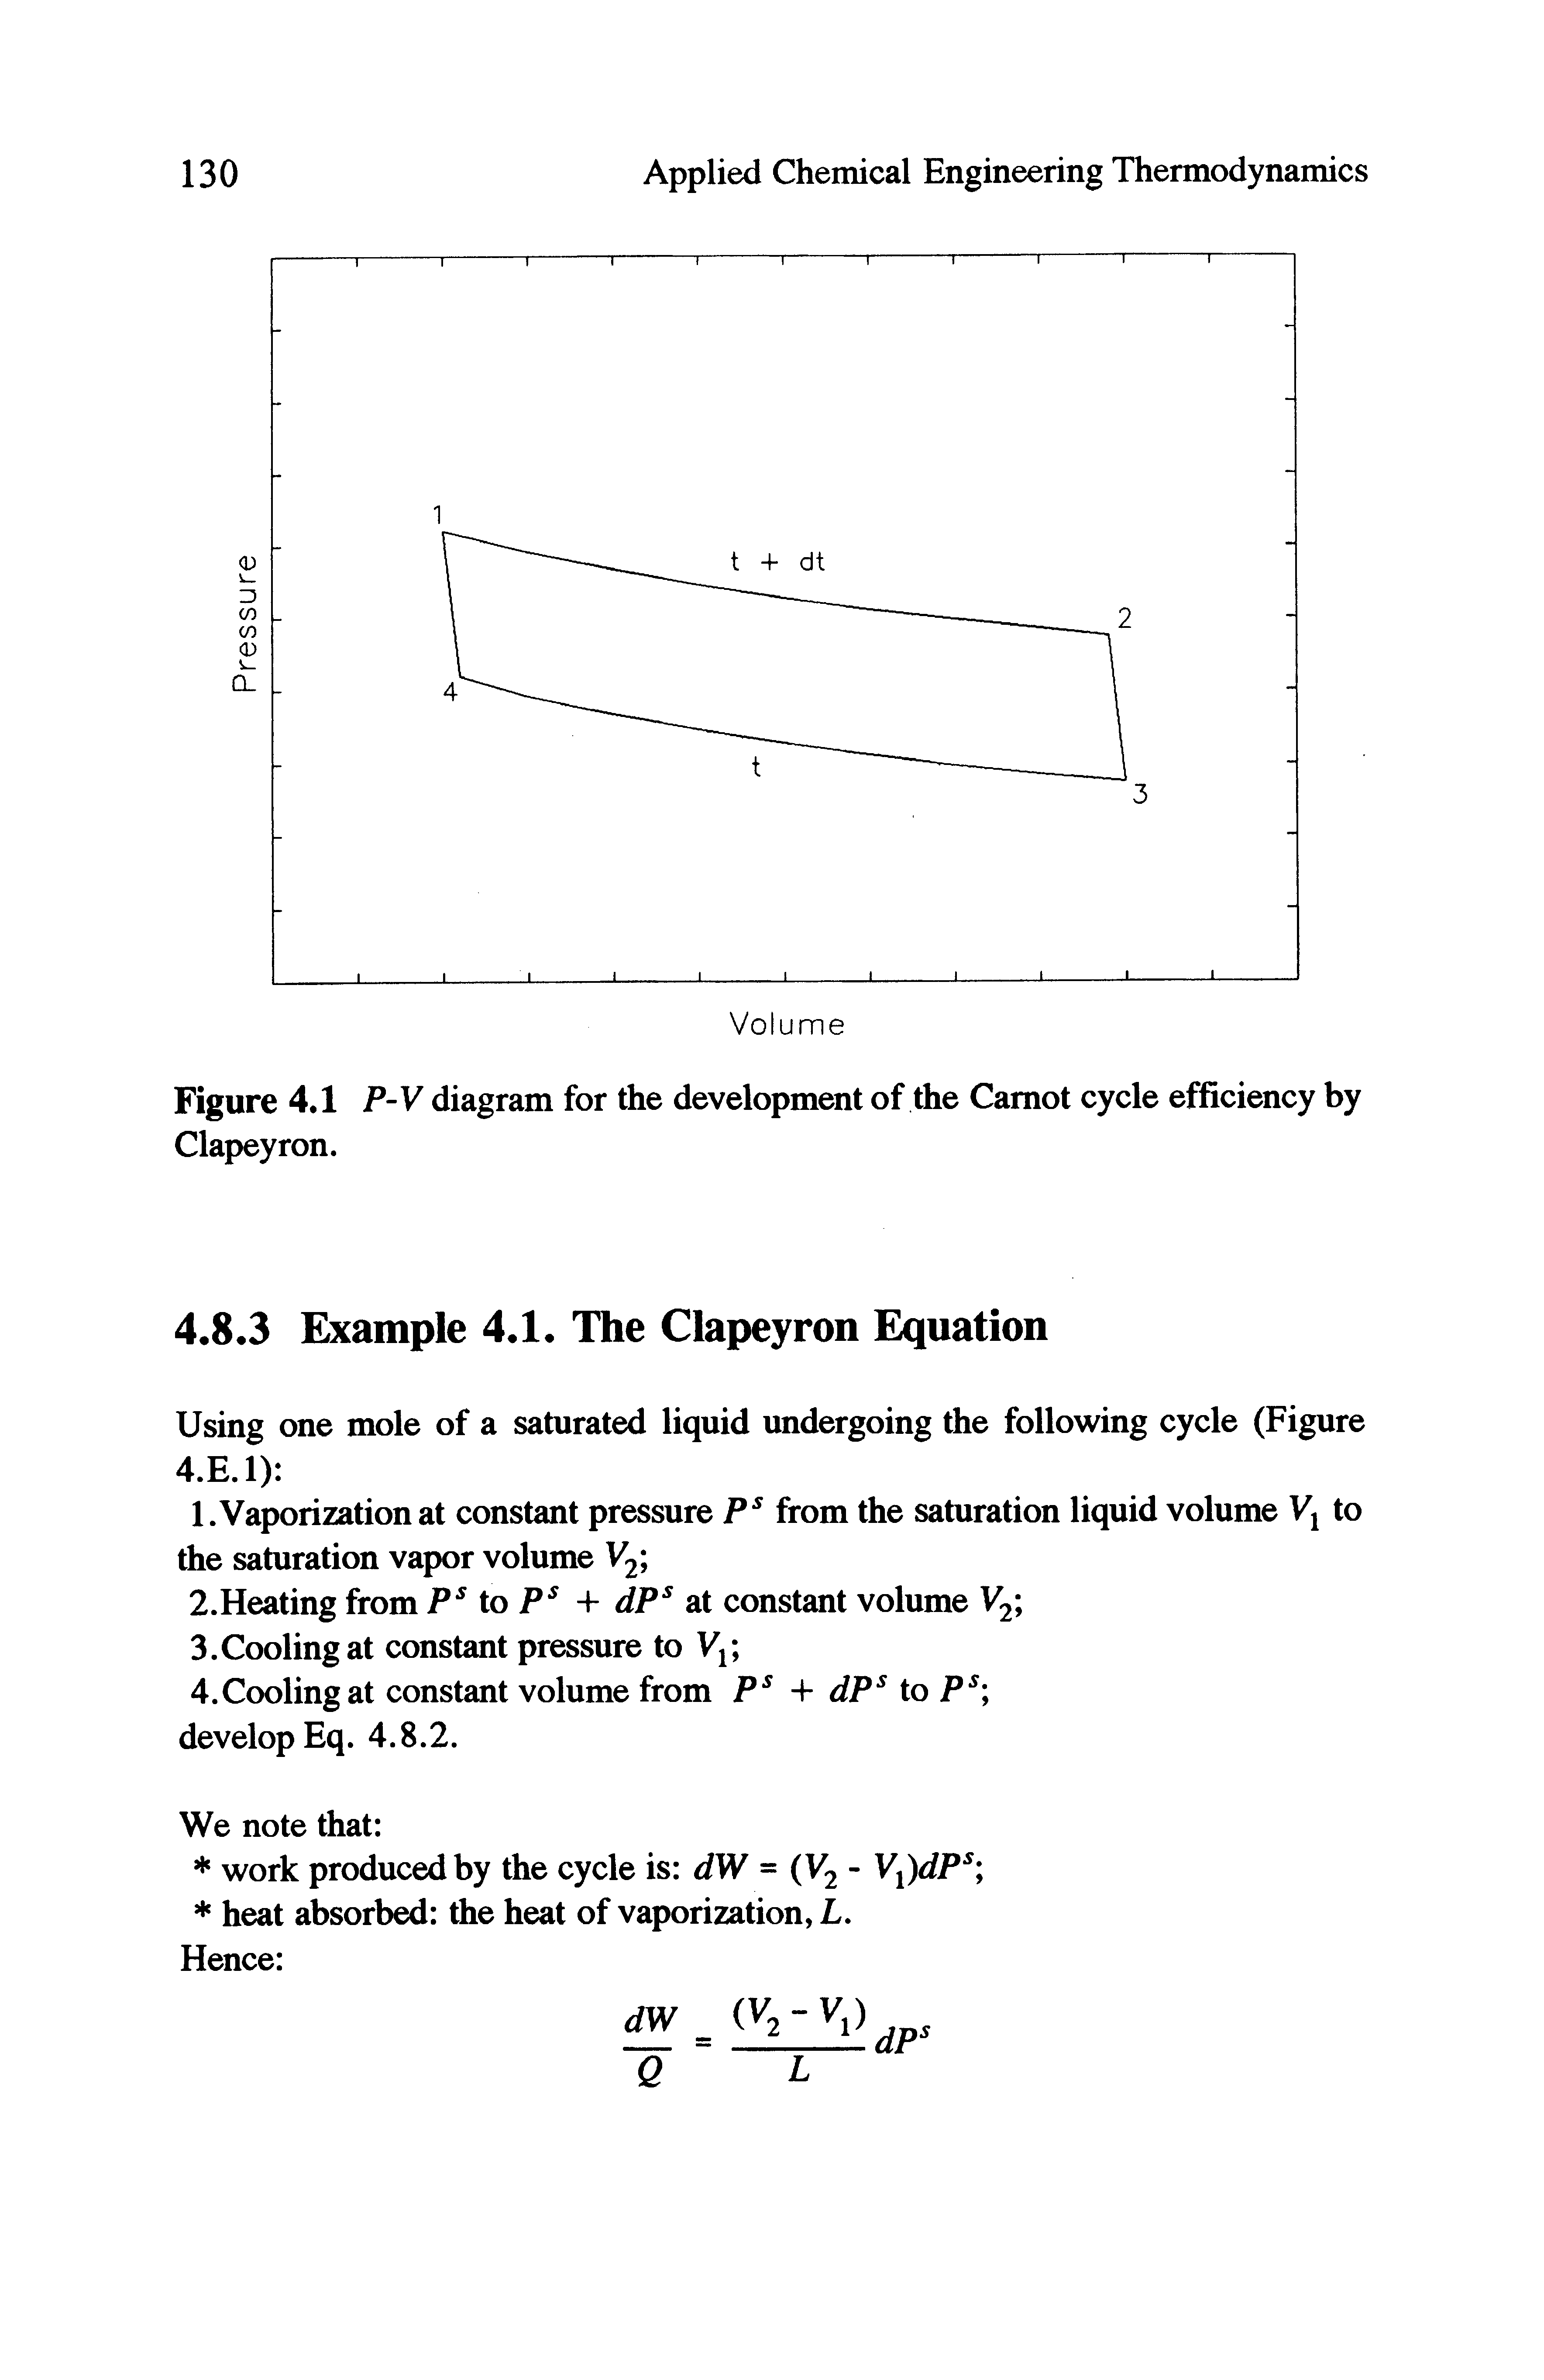 Figure 4.1 P-V diagram for the development of the Carnot cycle efficiency by Clapeyron.